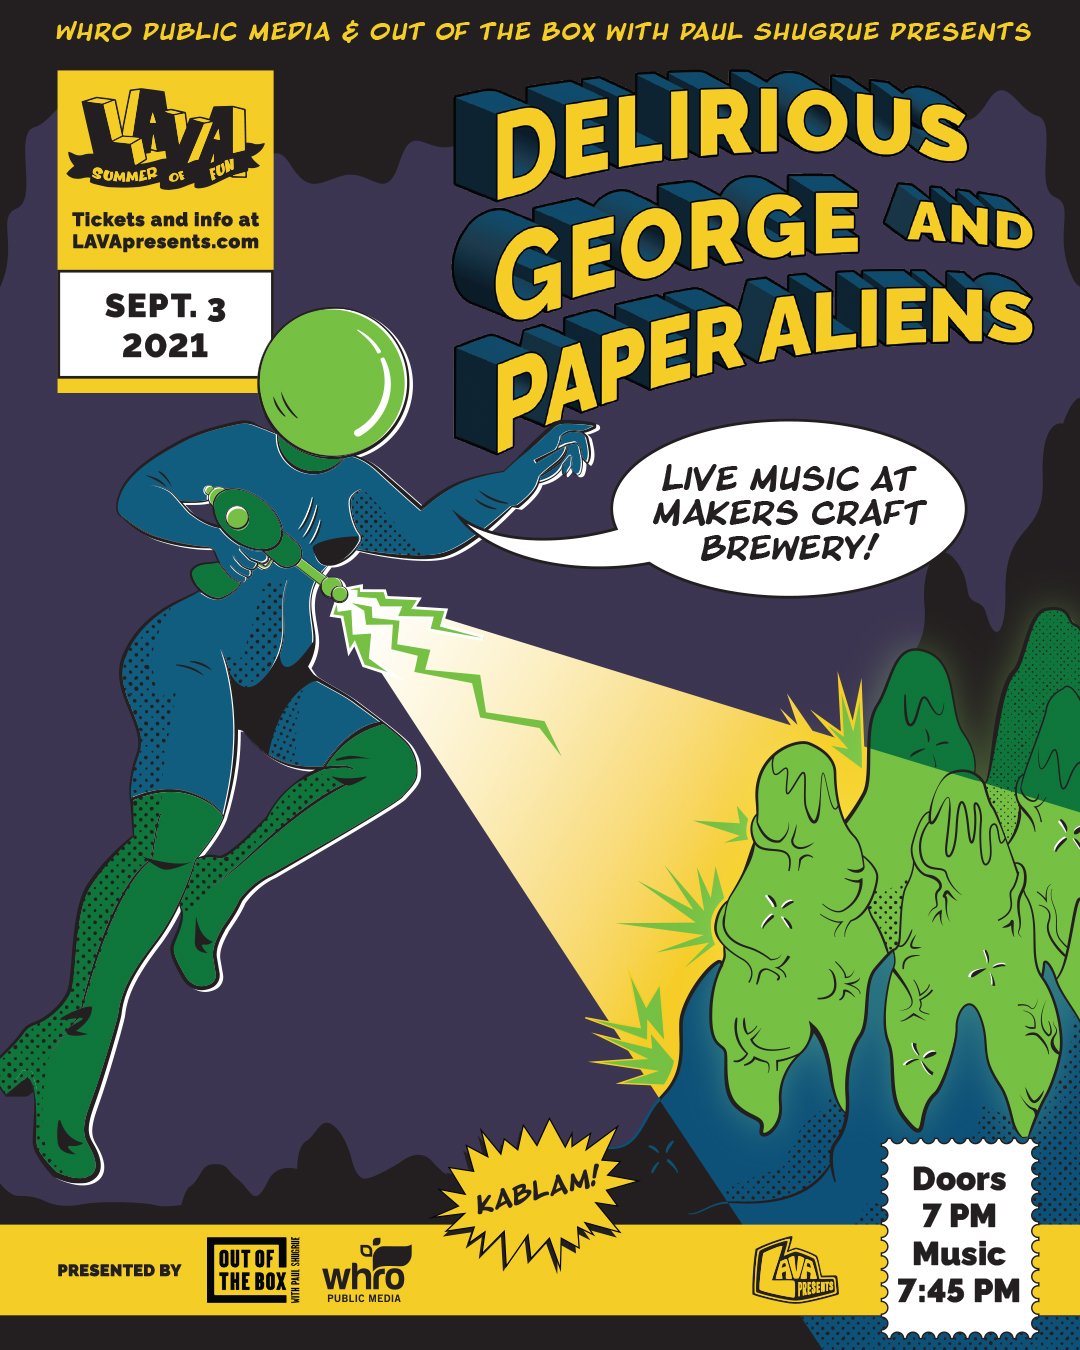 Delirious George and Paper Aliens